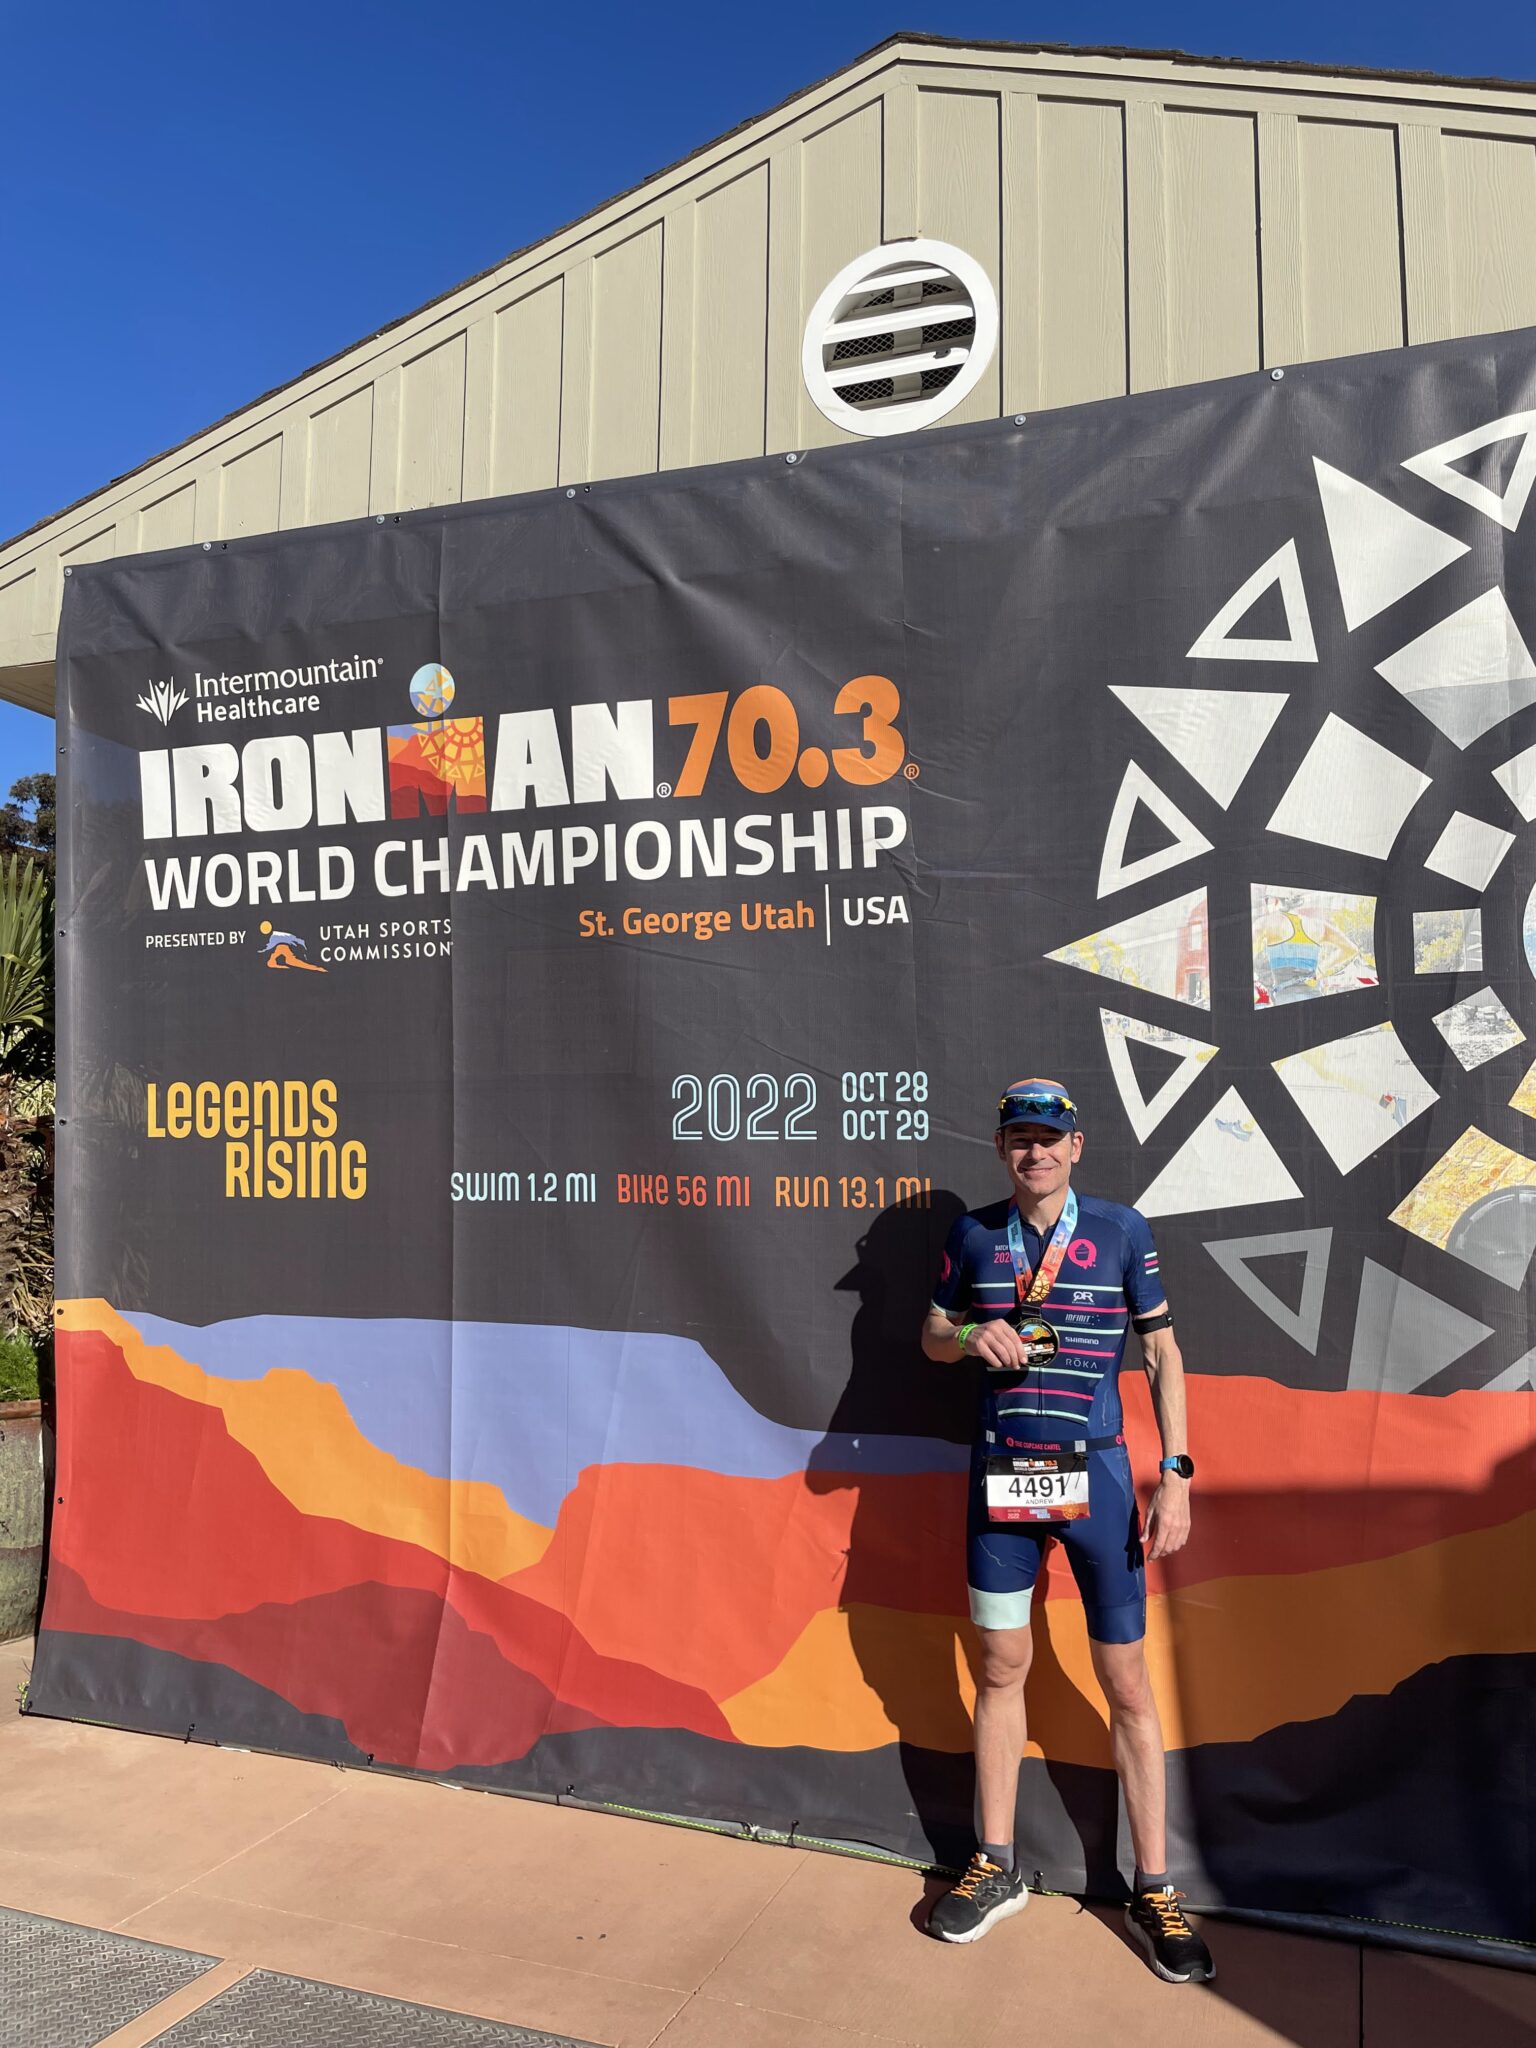 6 Tips on Qualifying for the 70.3 World Champs